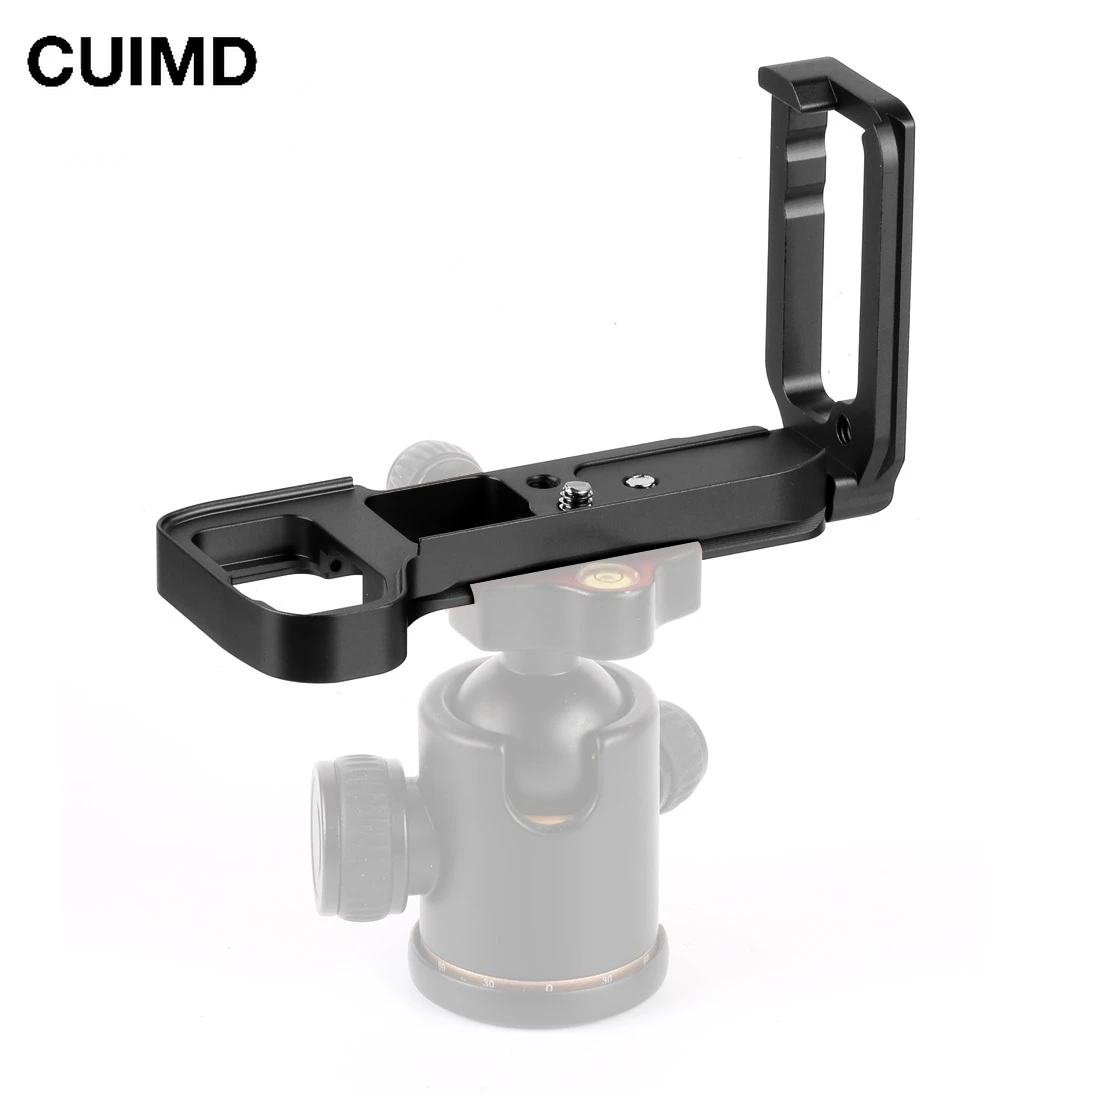 A7M3 Quick Release L Plate Bracket Holder Hand Grip for Sony A7III A7RIII A9 Quick Release Baseplate Side Plate A7R3 A73 Camera